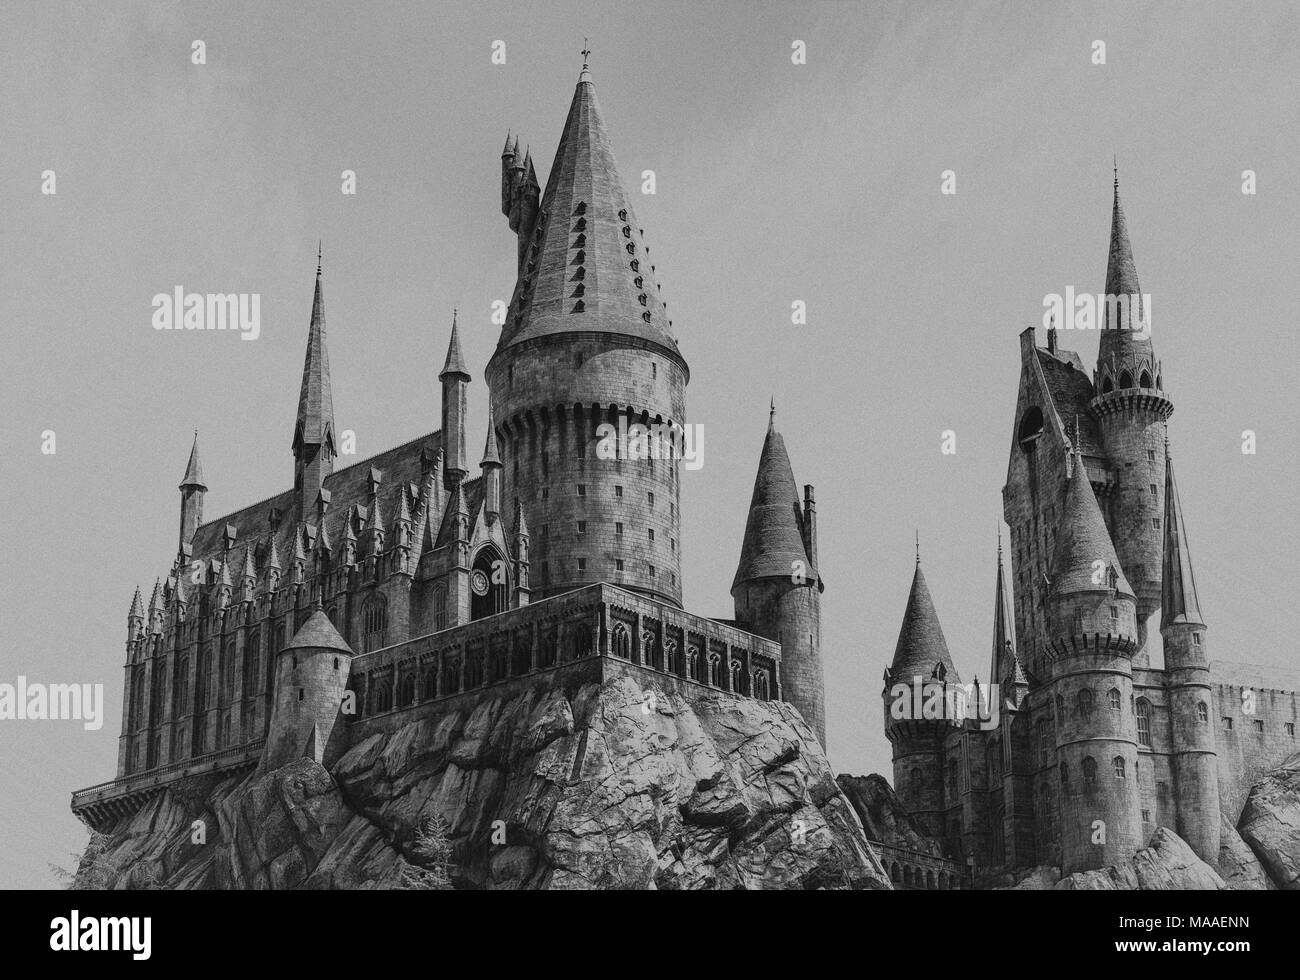 Los Angeles, California, USA -March 28, 2018: Hogwarts Castle, The Wizard World of Harry Potter in Universal Studios Hollywood at Los Angeles, CA Stock Photo